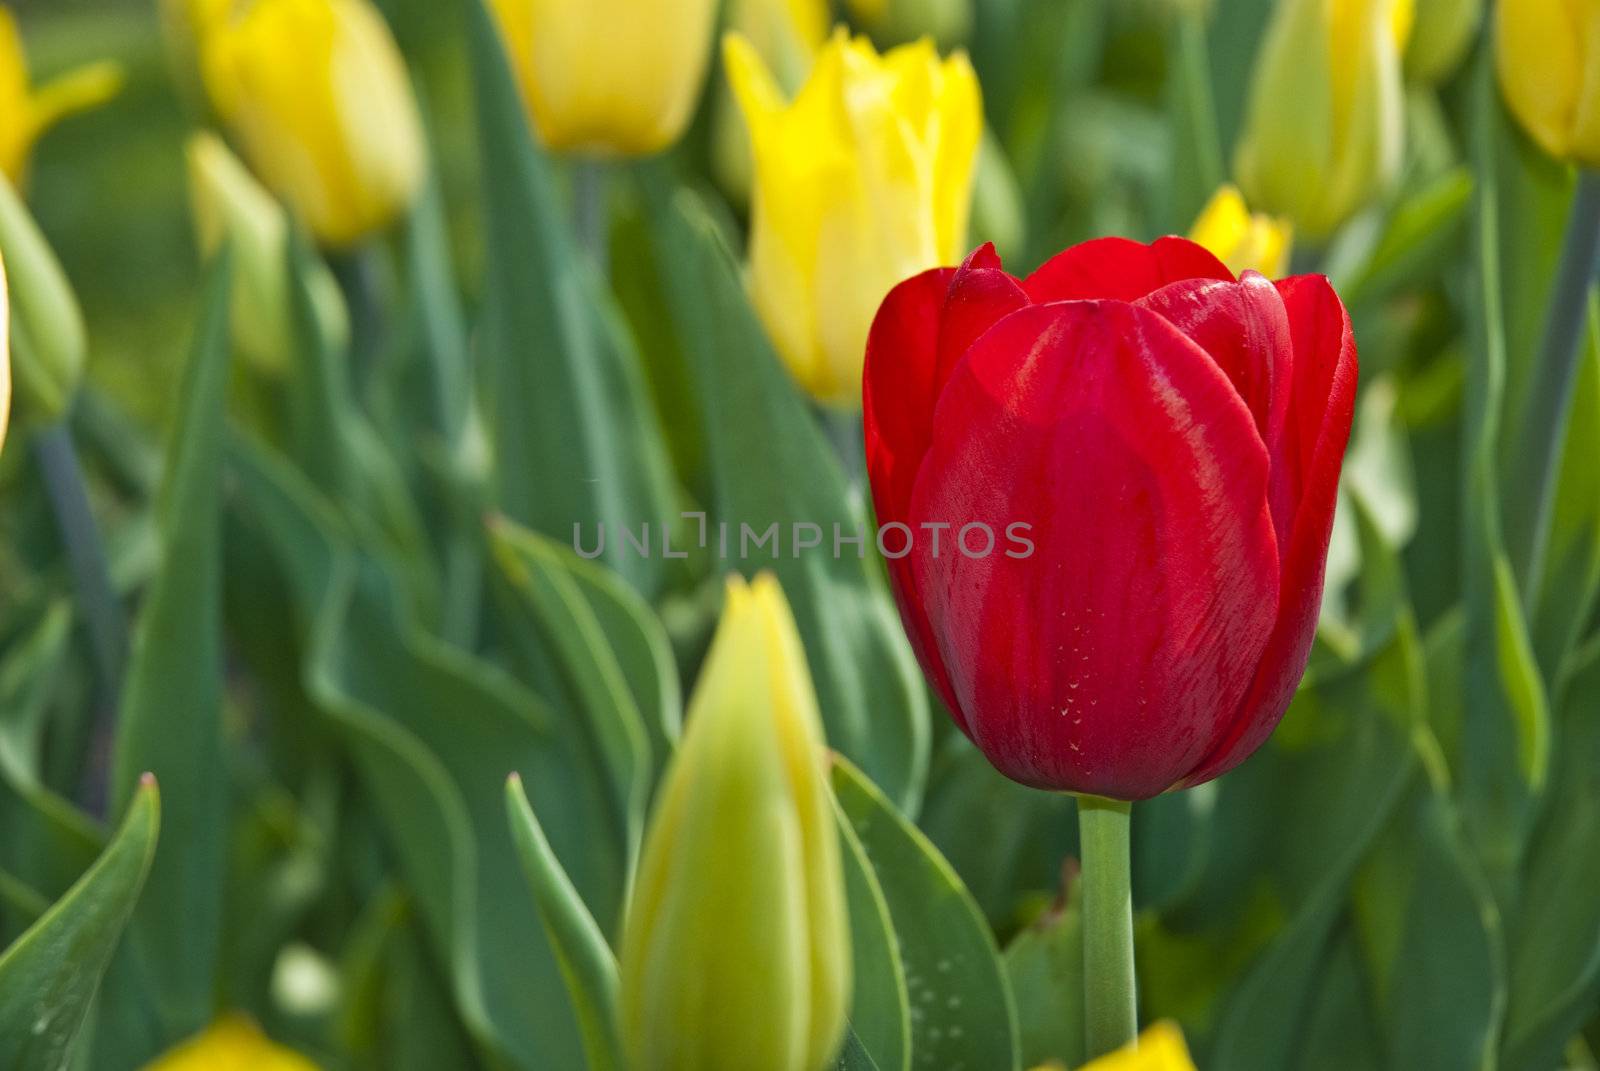 Beautiful flower red and yellow tulips in park by mozzyb